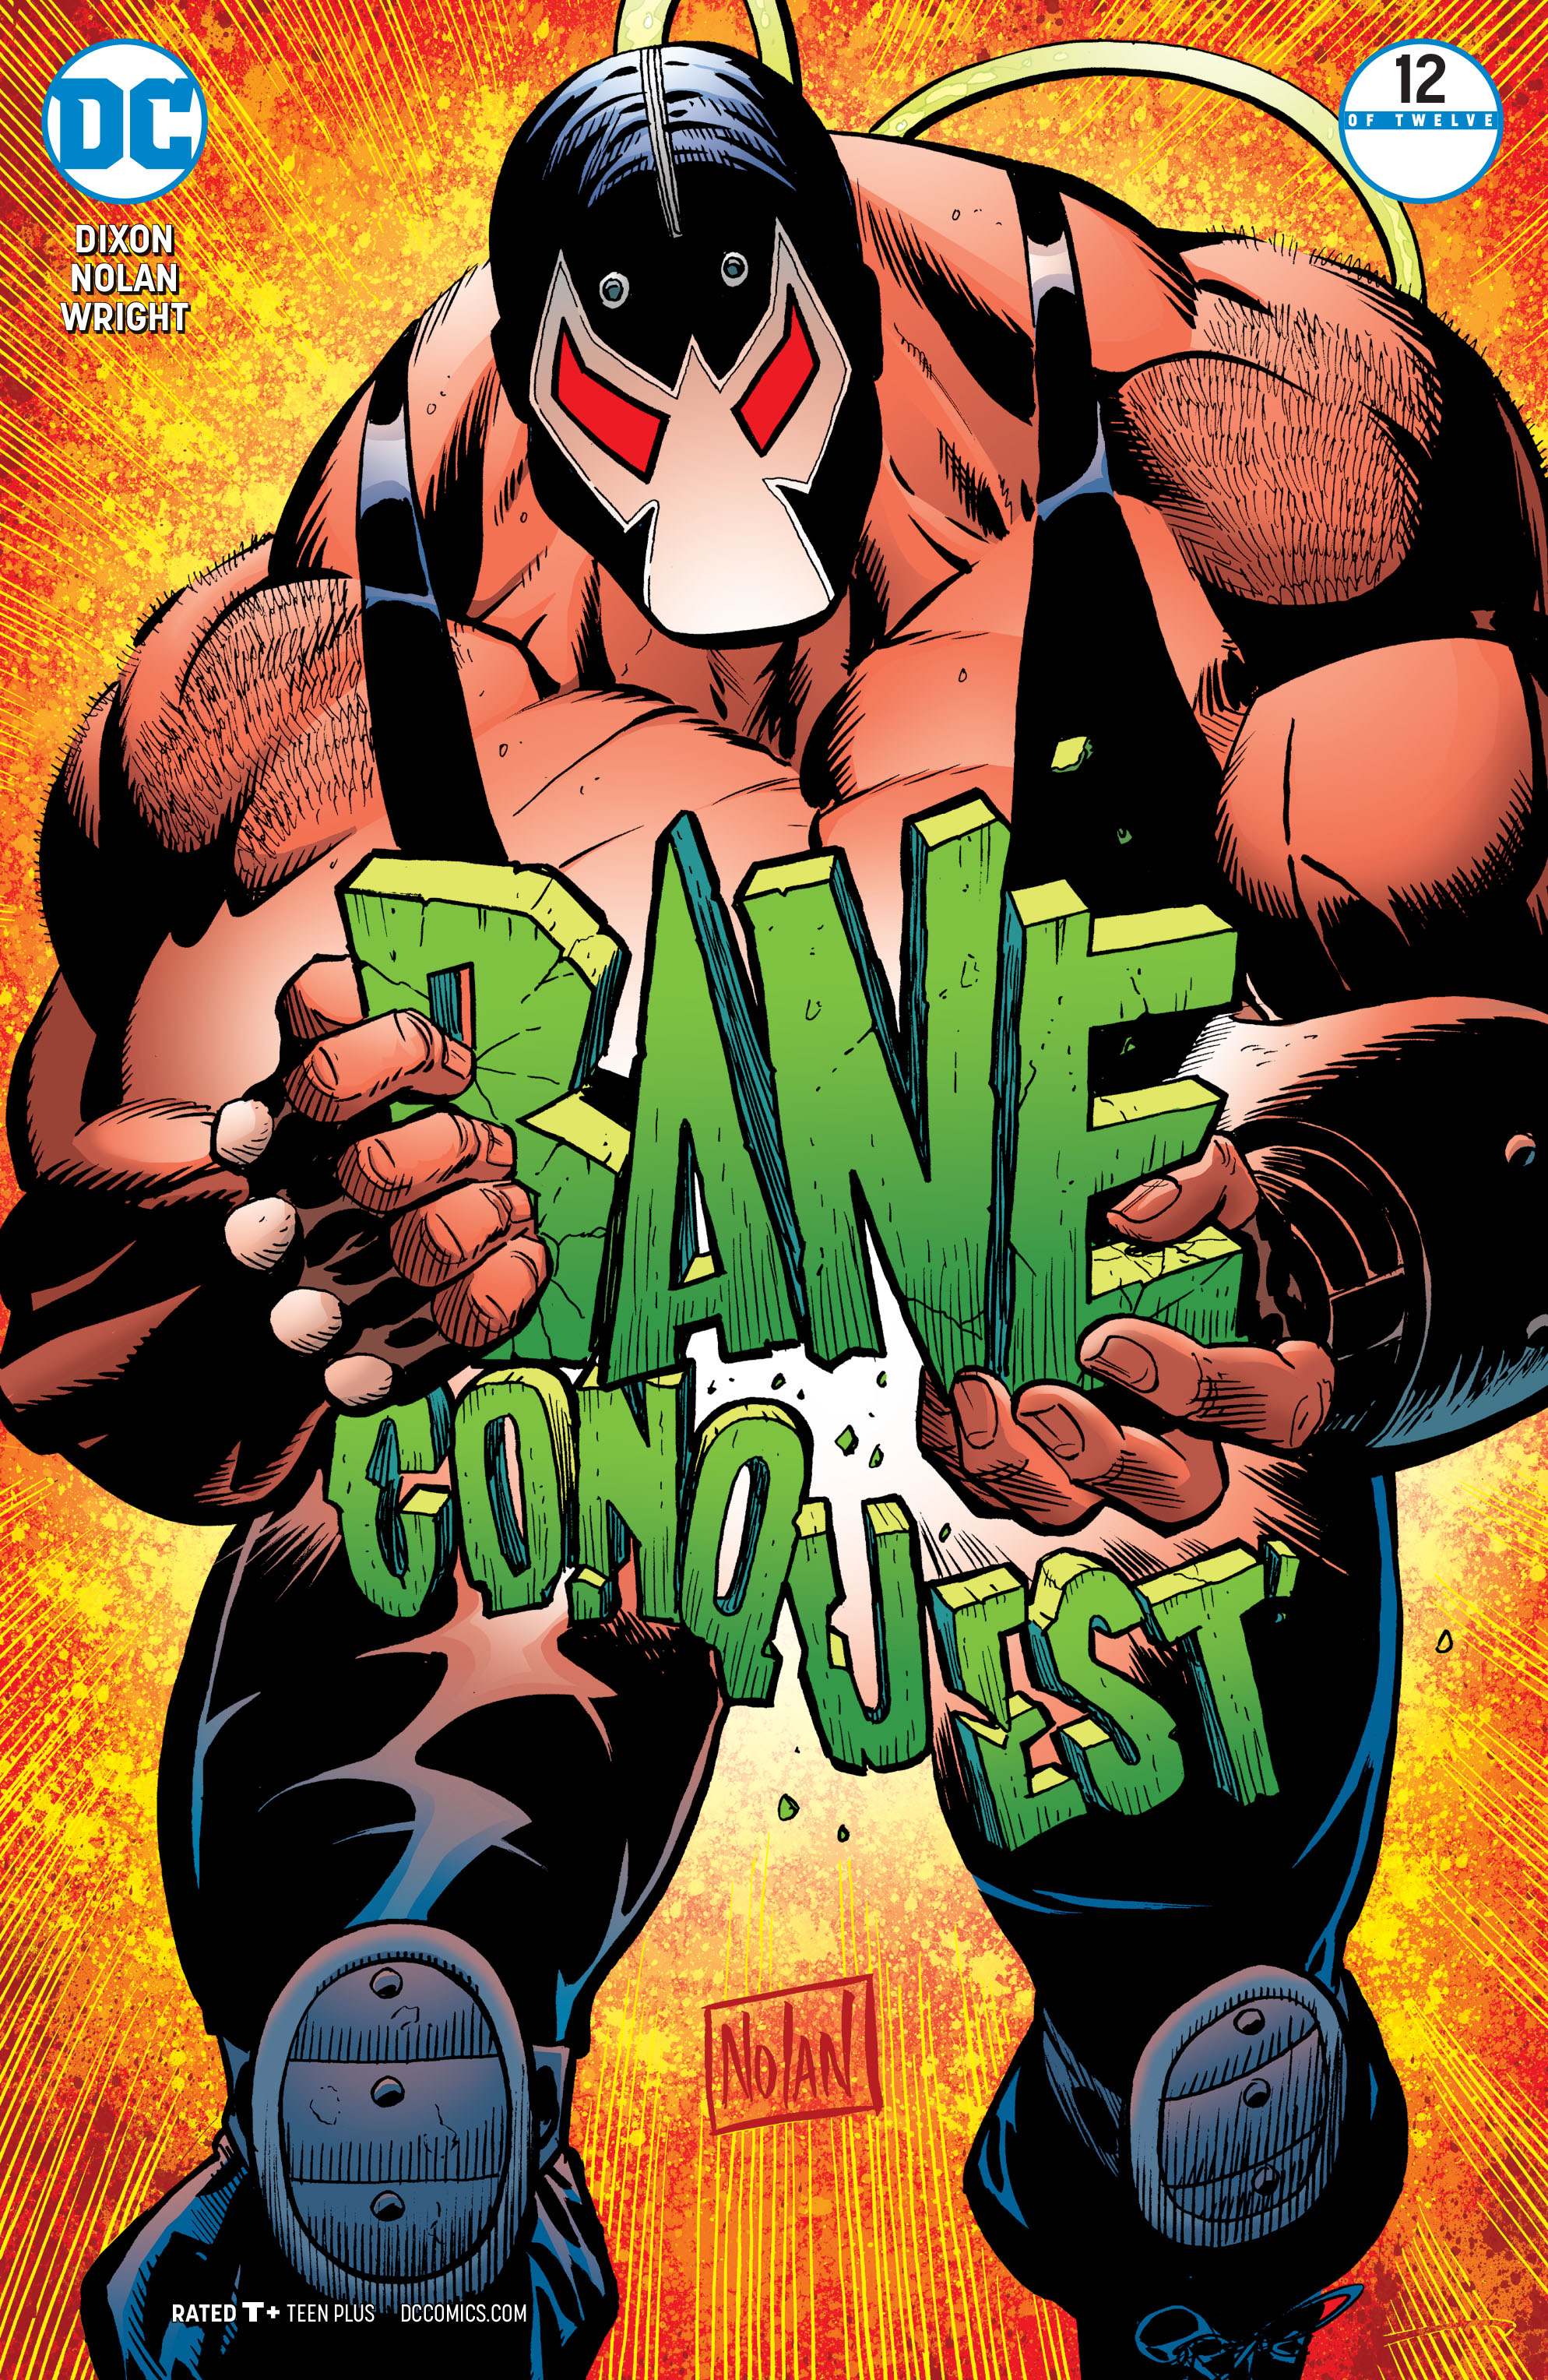 BANE CONQUEST #12 (OF 12)